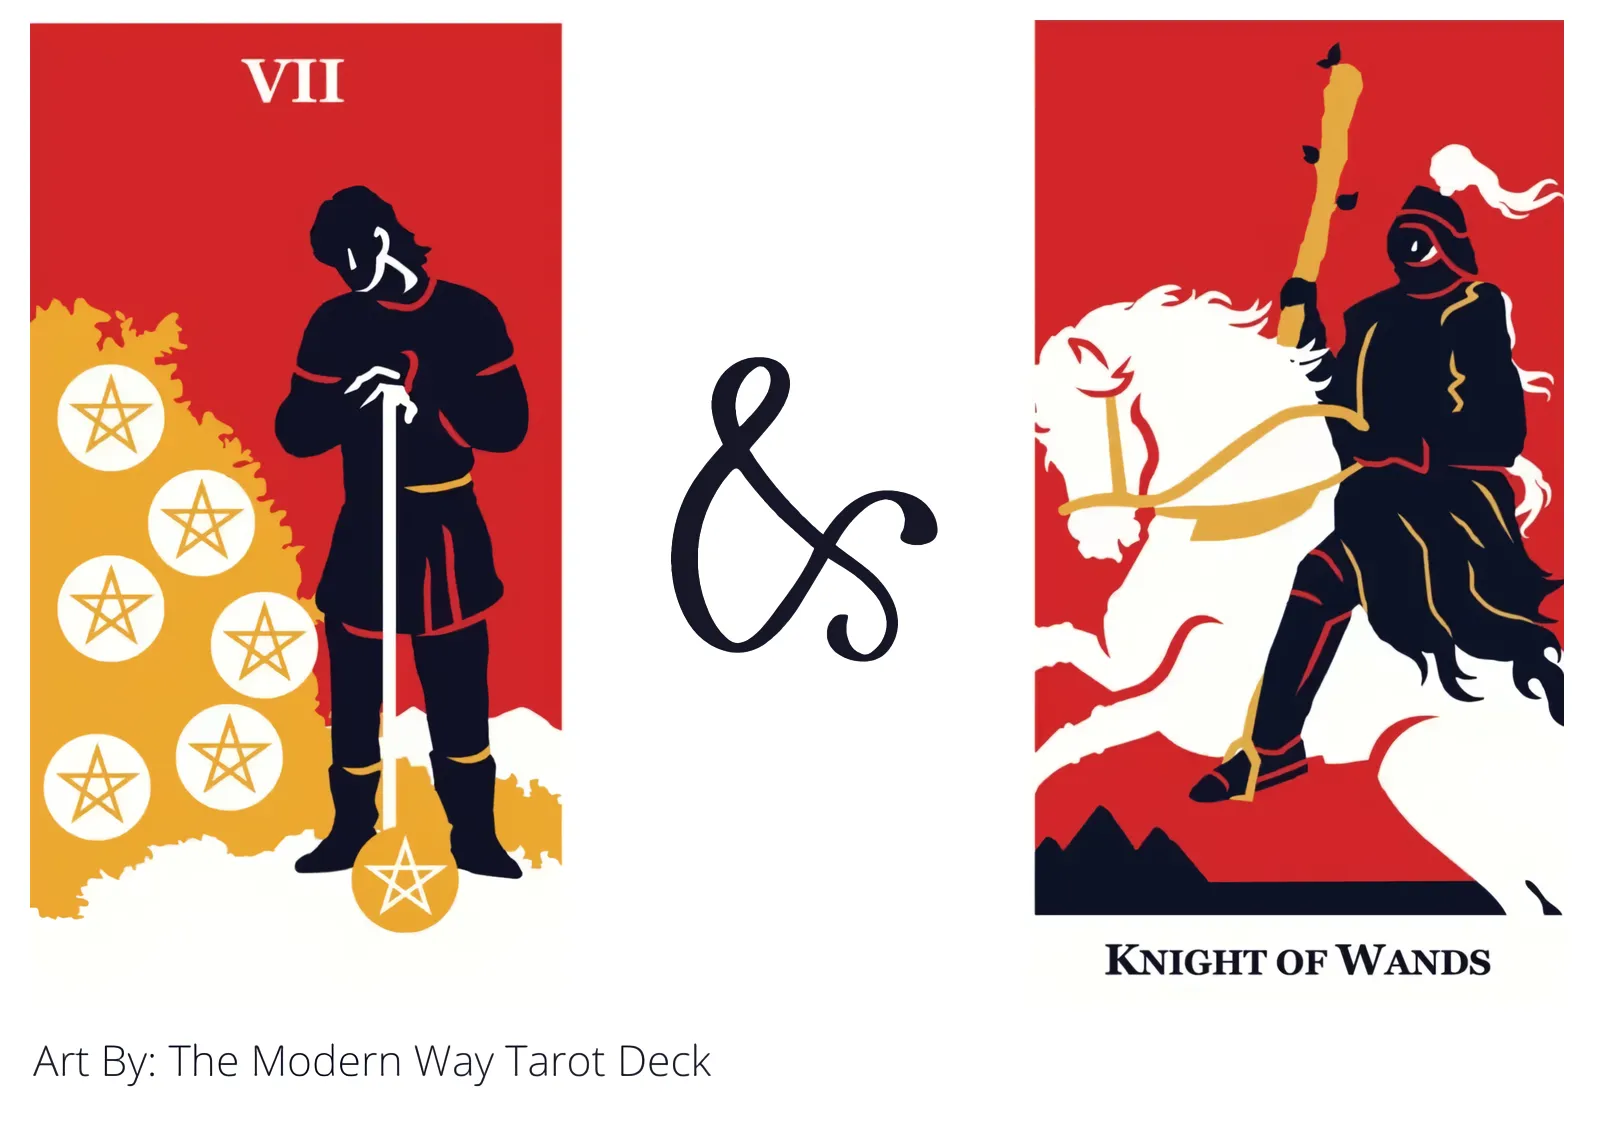 seven of pentacles and knight of wands tarot cards together